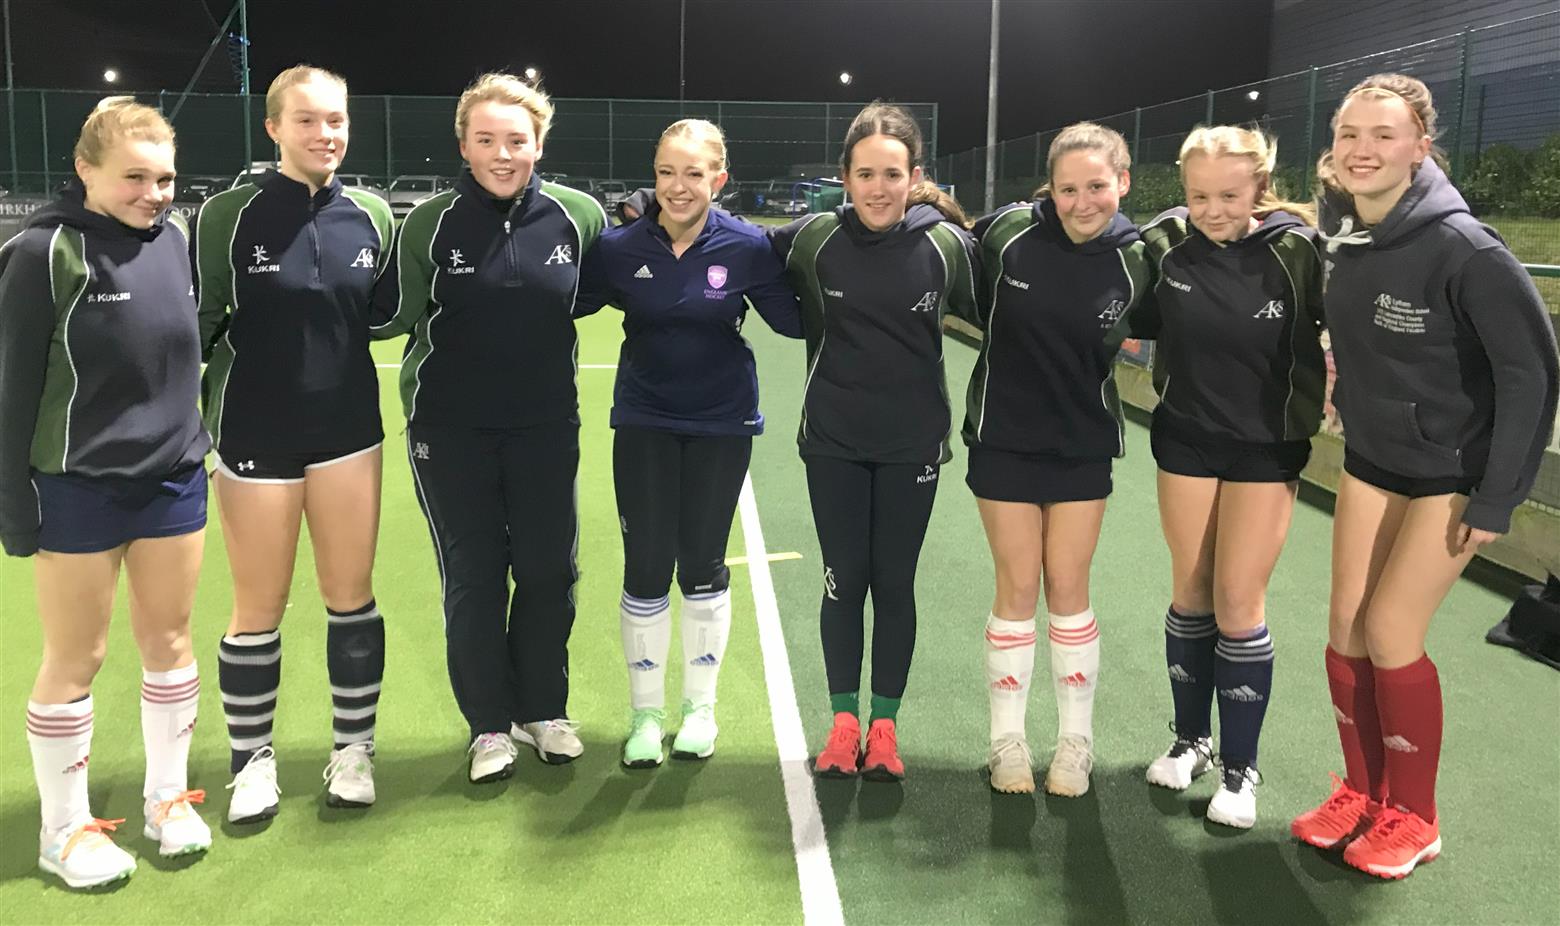 8 AKS hockey players selected for North West Talent Academy